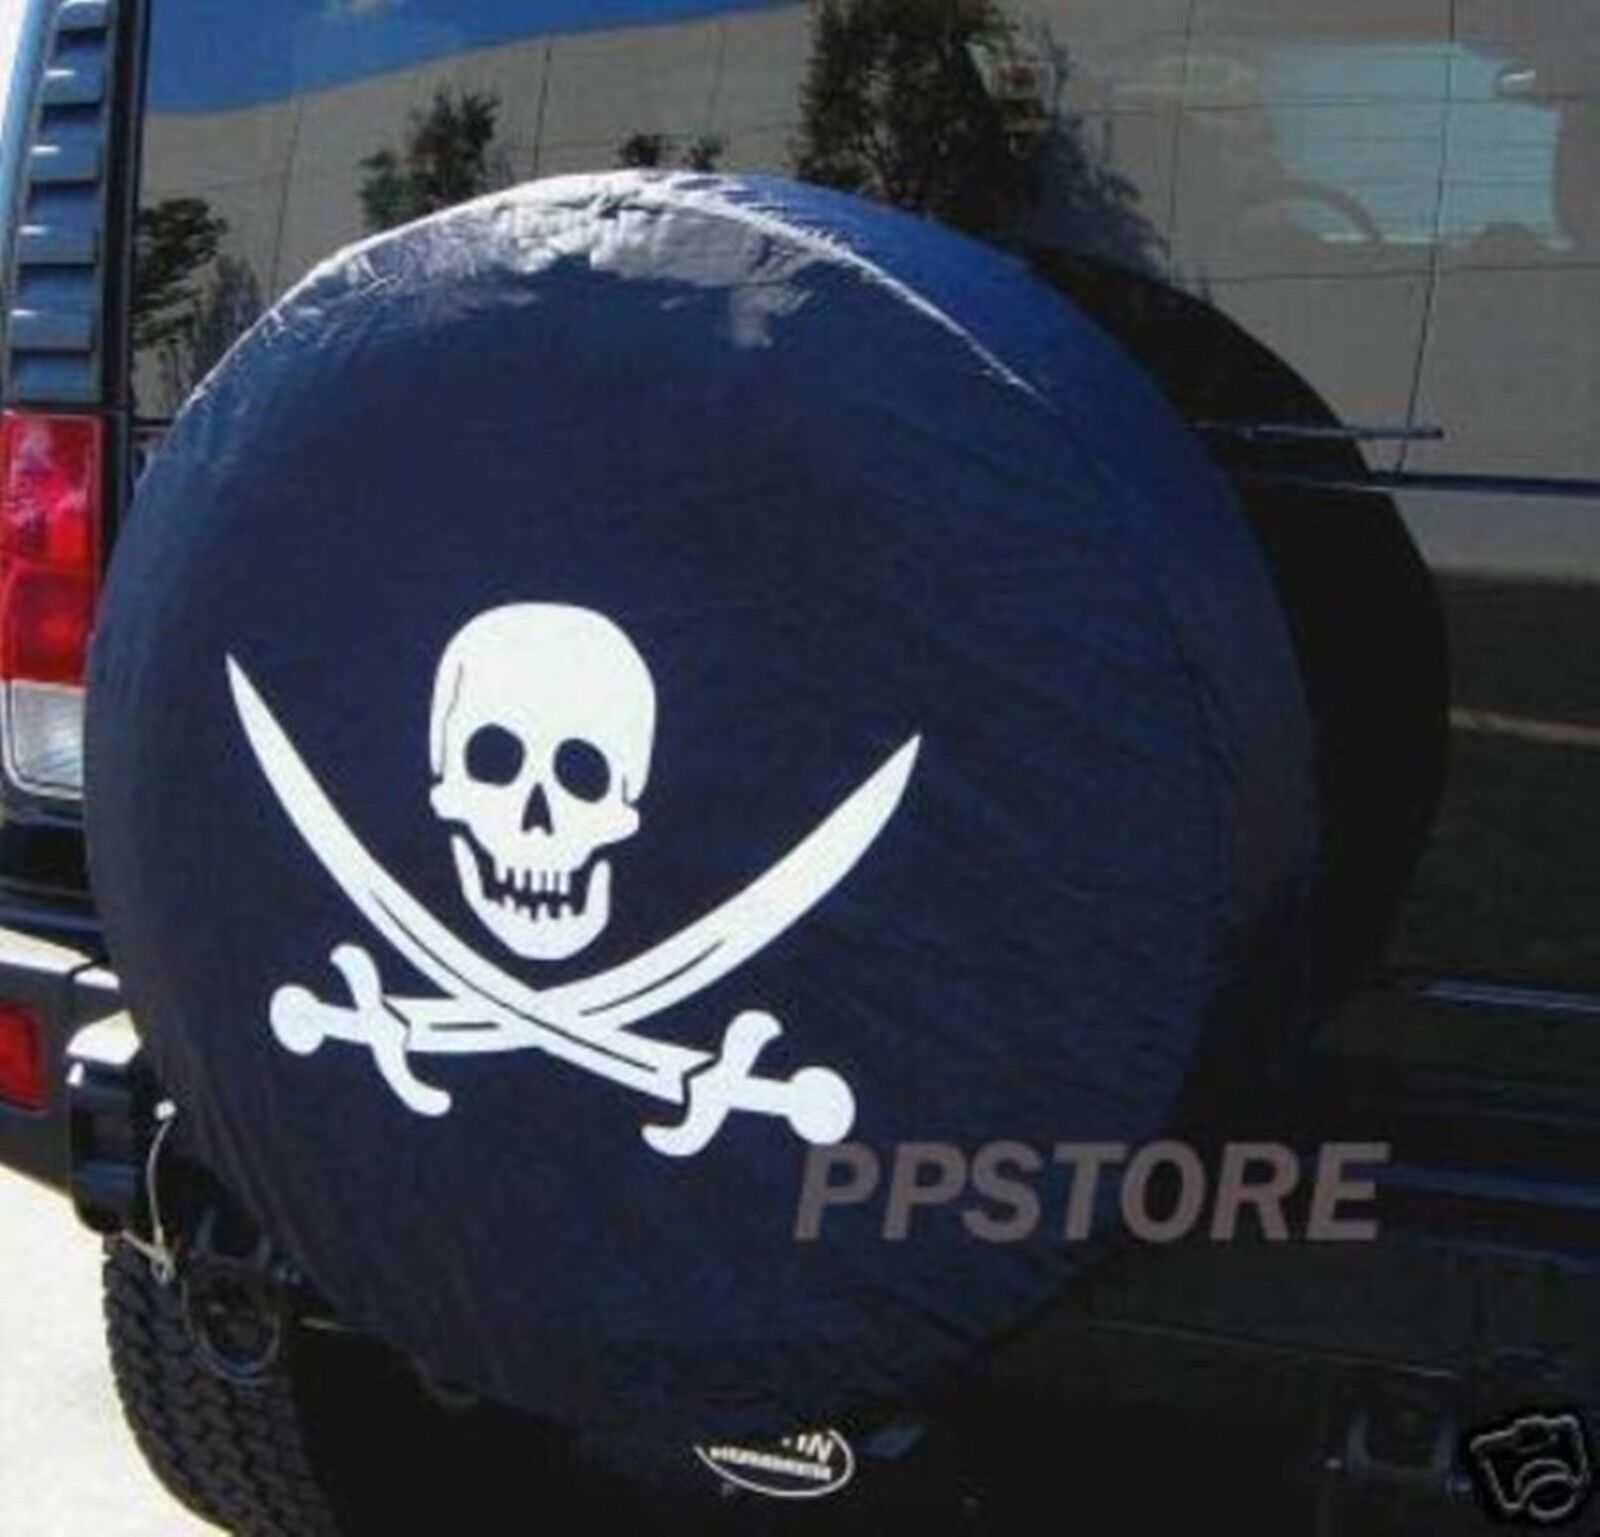 NEW SPARE TIRE COVER 225/75R16 Pirate Skull & Crosswords Printed Water-resist